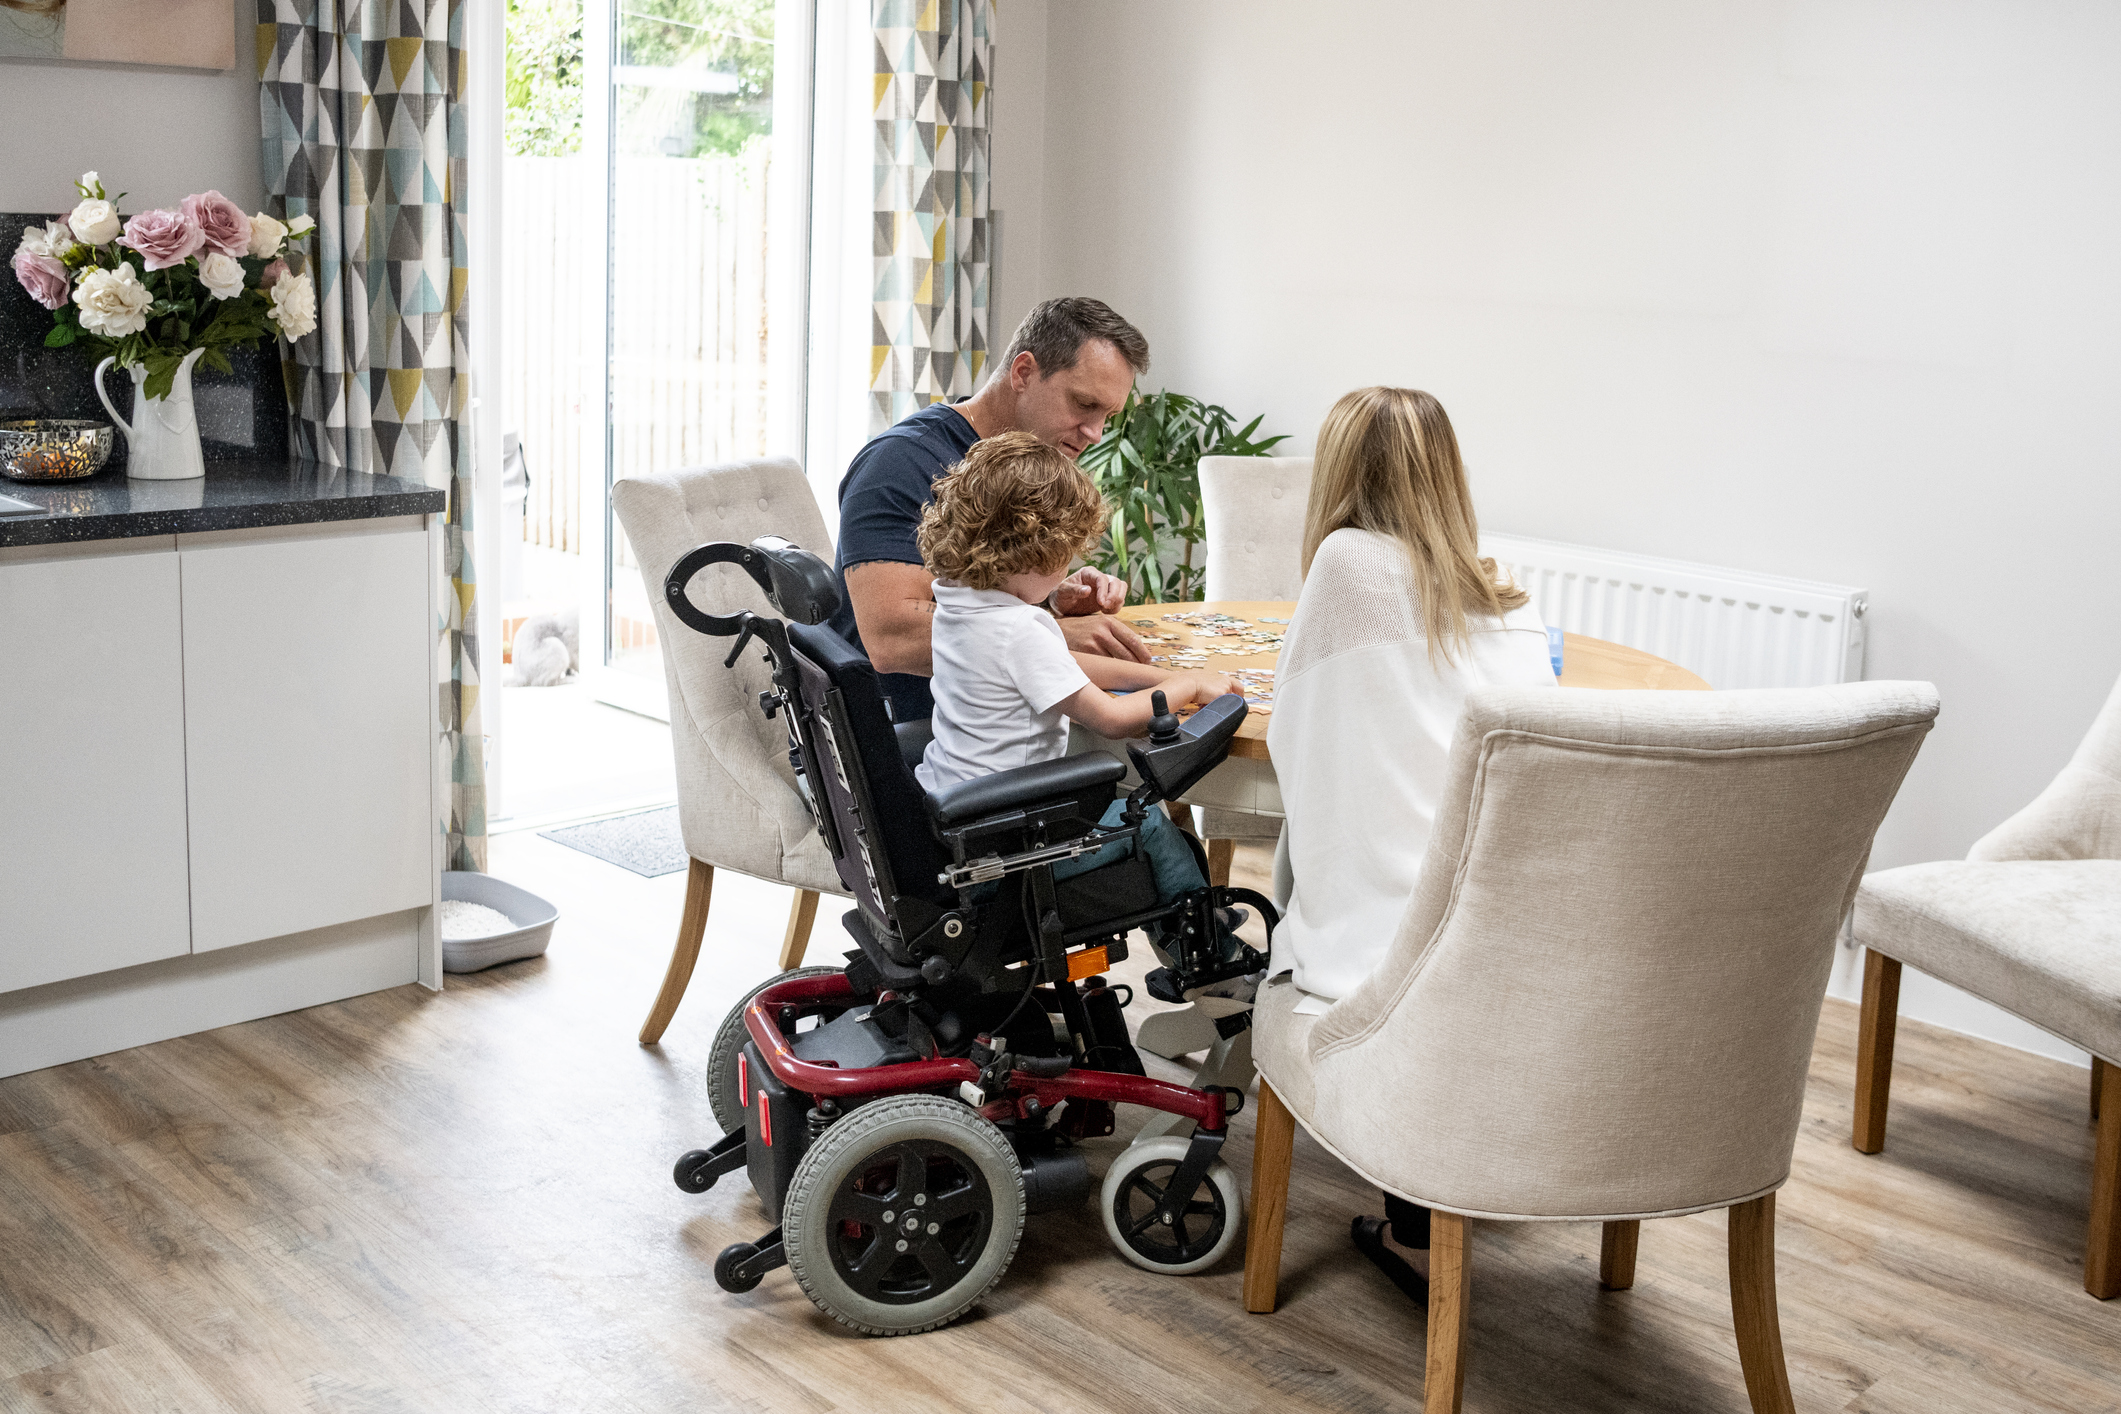 A child in a wheelchair working on a puzzle with two adults